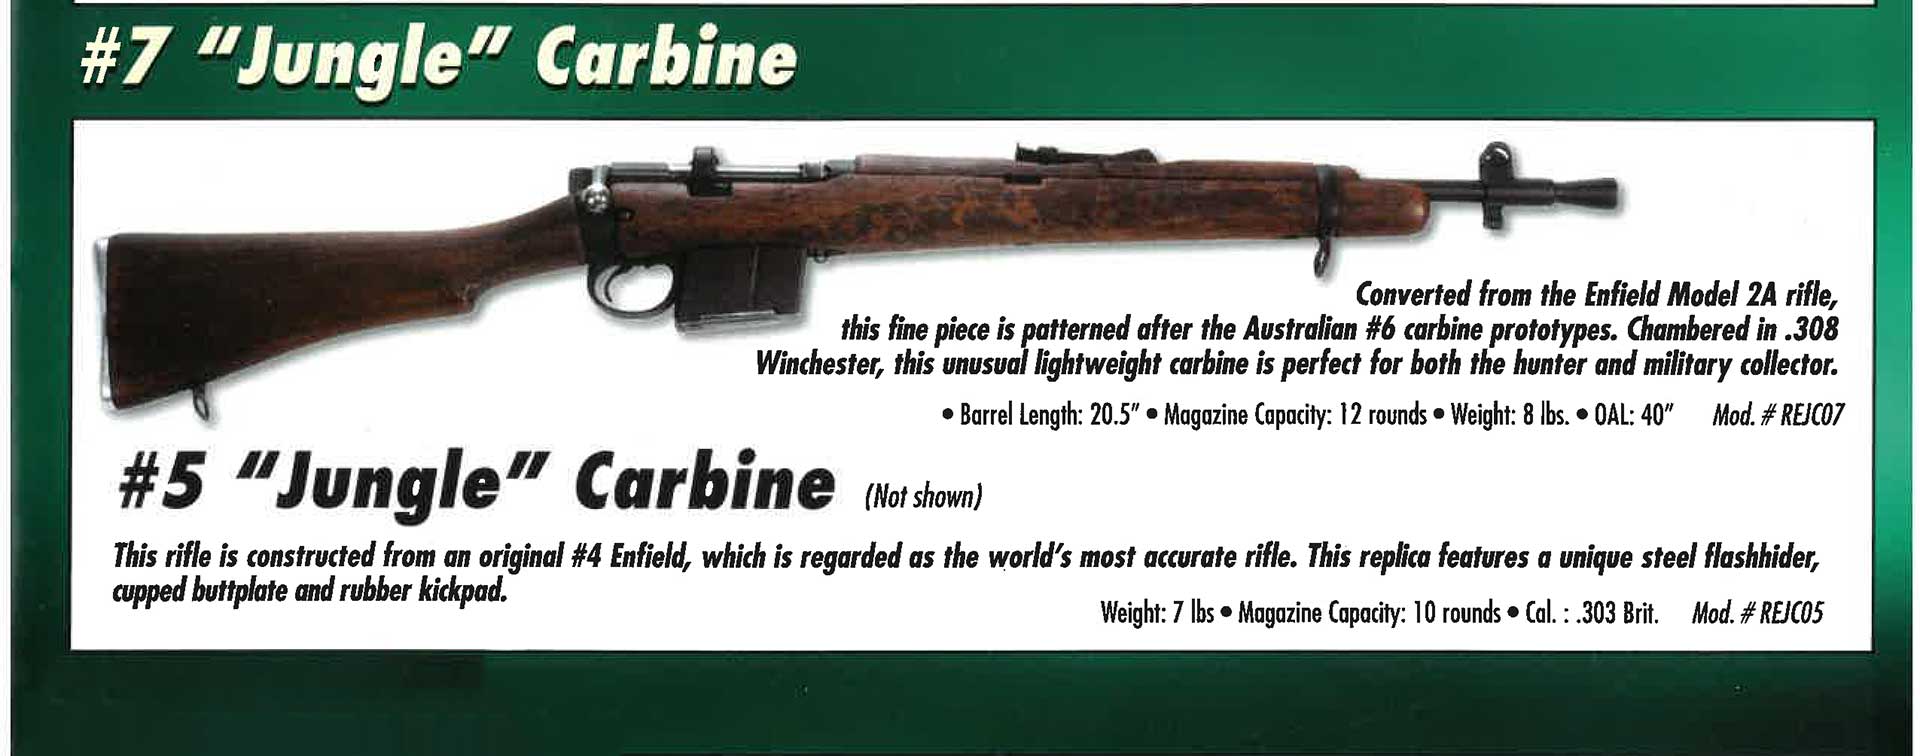 Lee-Enfield No. 5 'Jungle Carbine:' An Exploded View